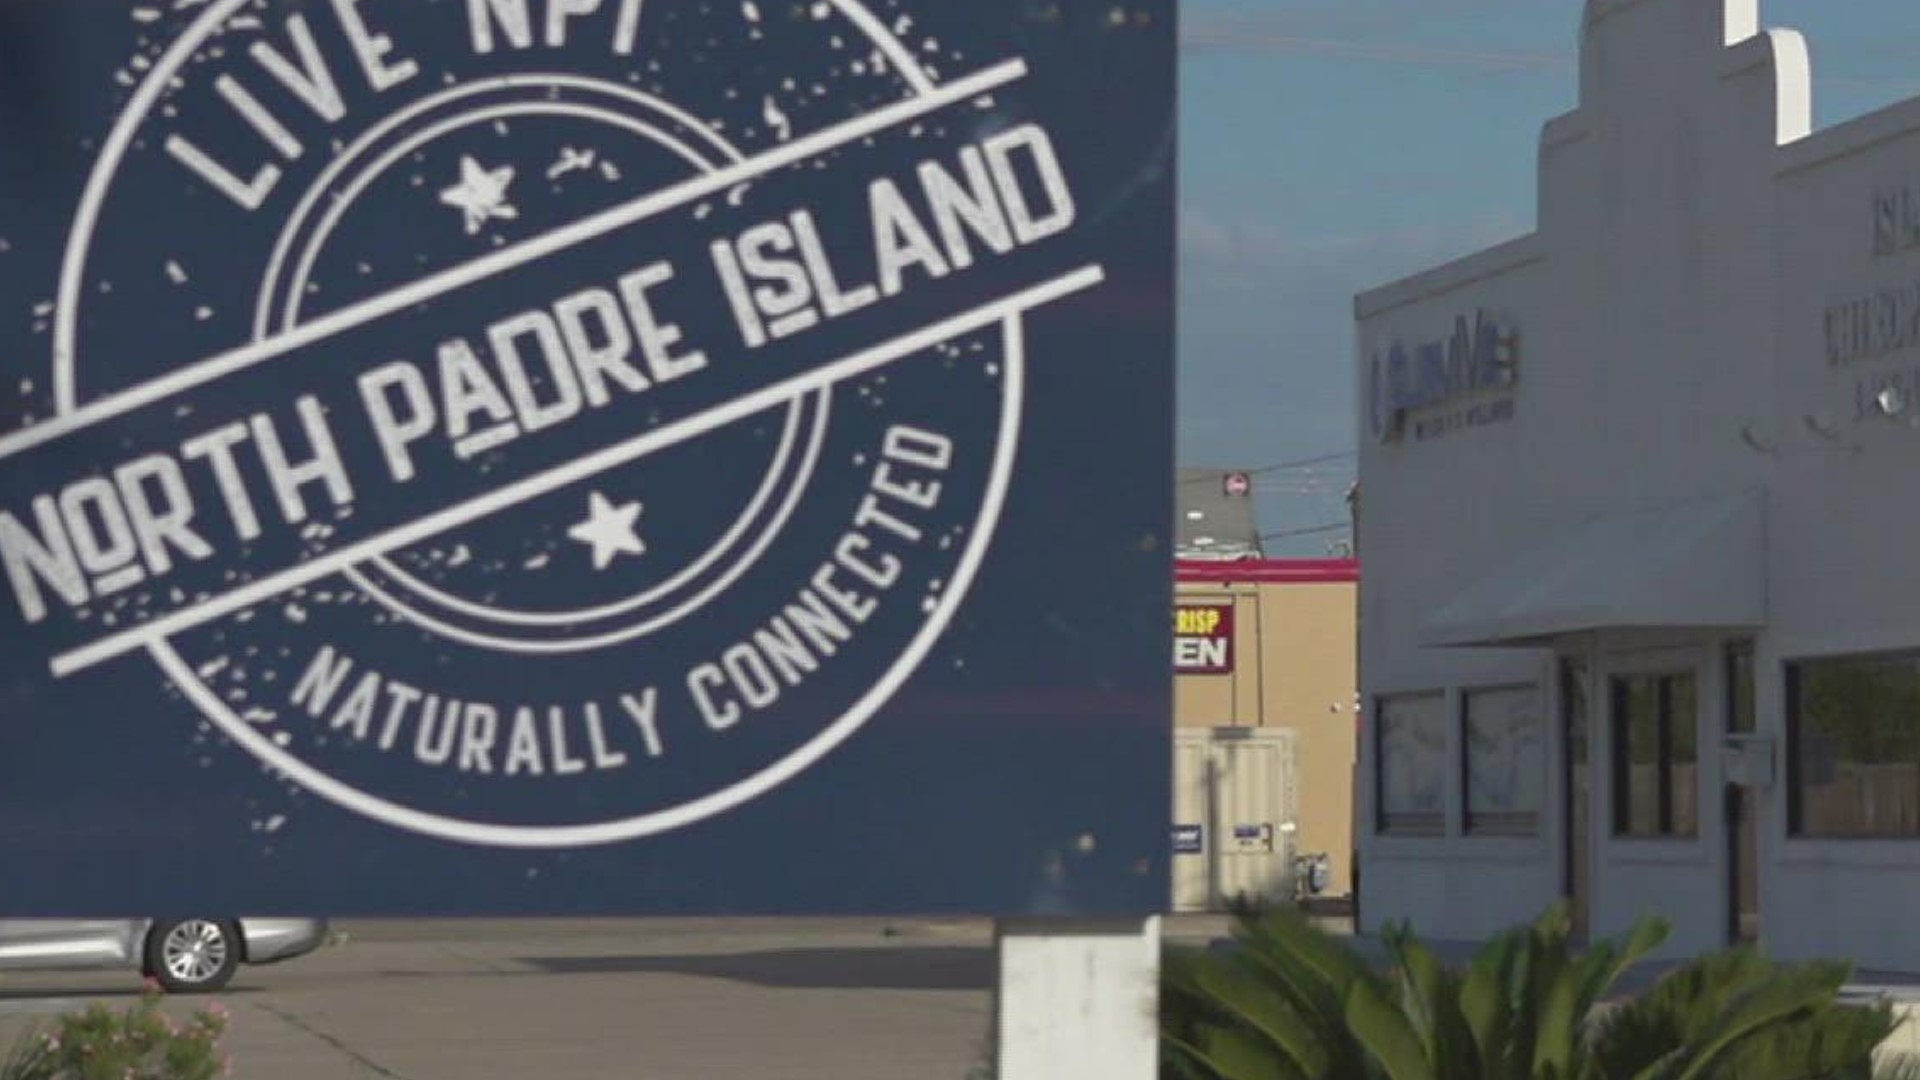 Corpus Christi City Council approved plans for a series of new developments on North Padre Island called Whitecap Preserve.